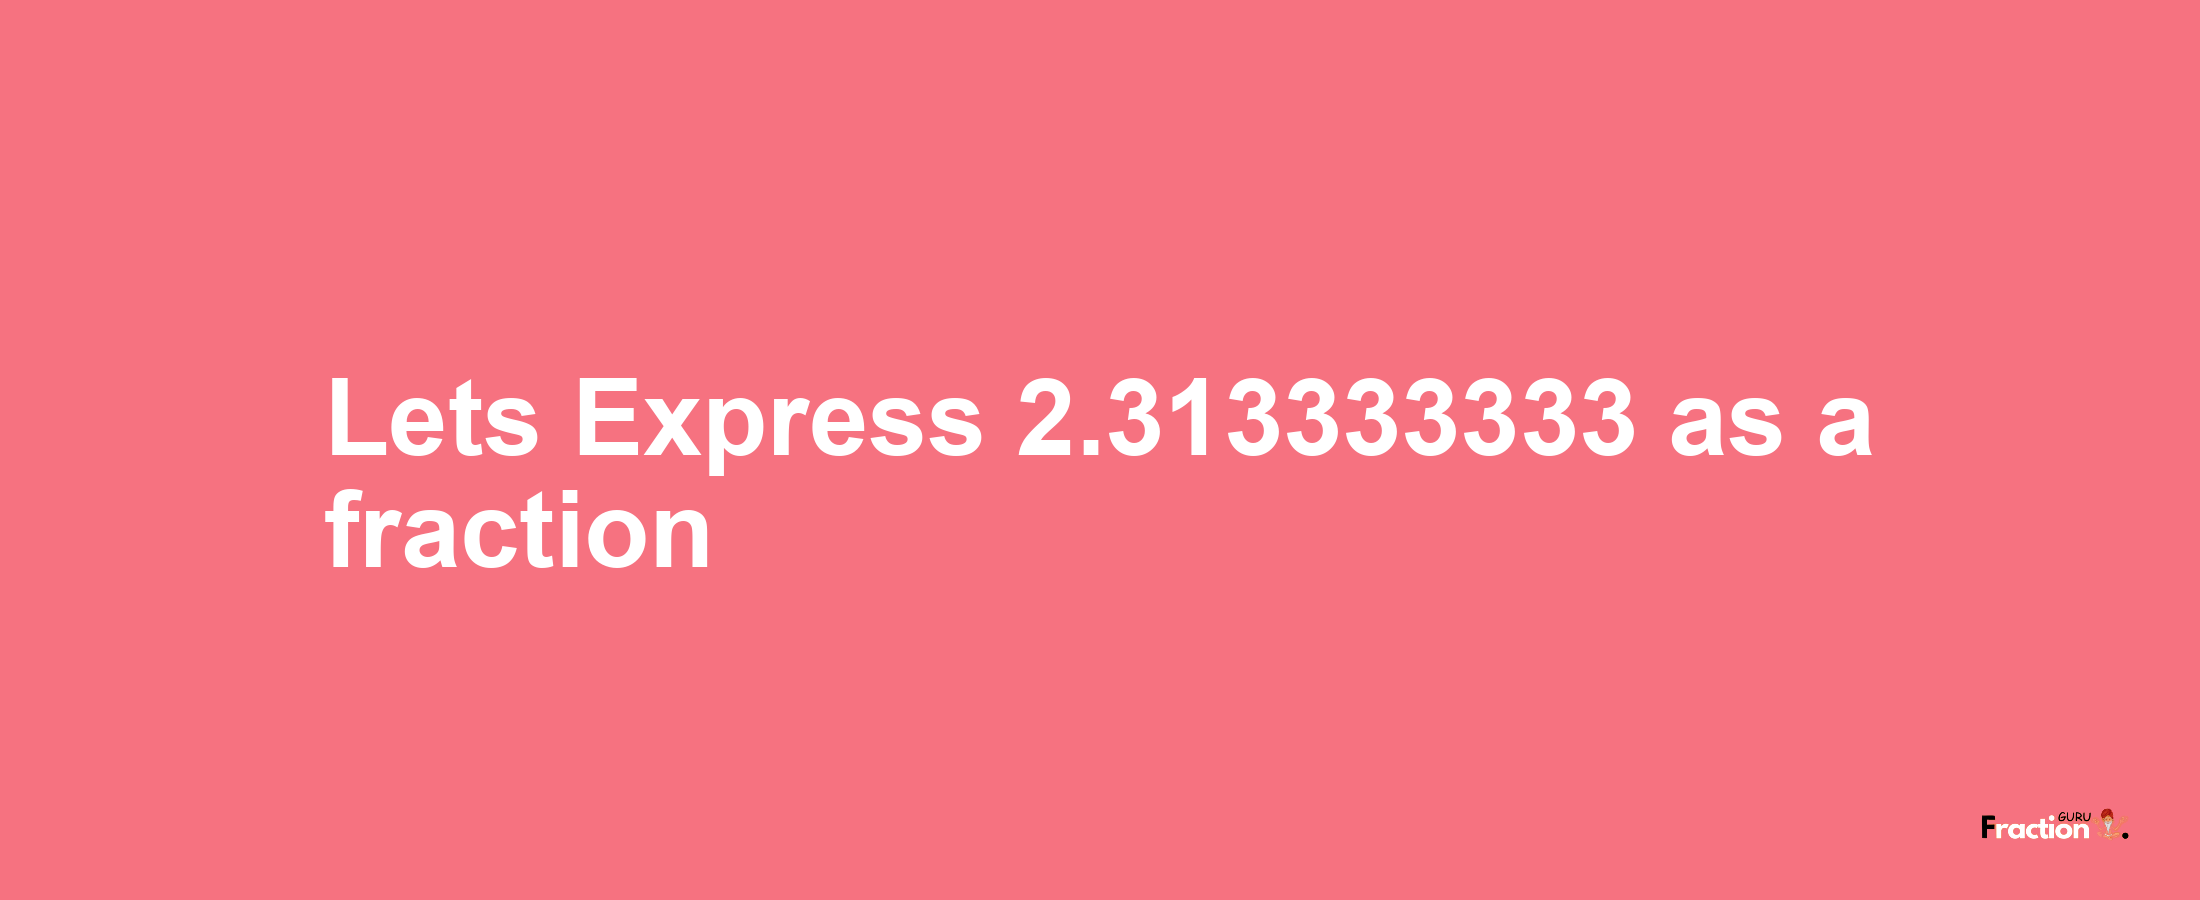 Lets Express 2.313333333 as afraction